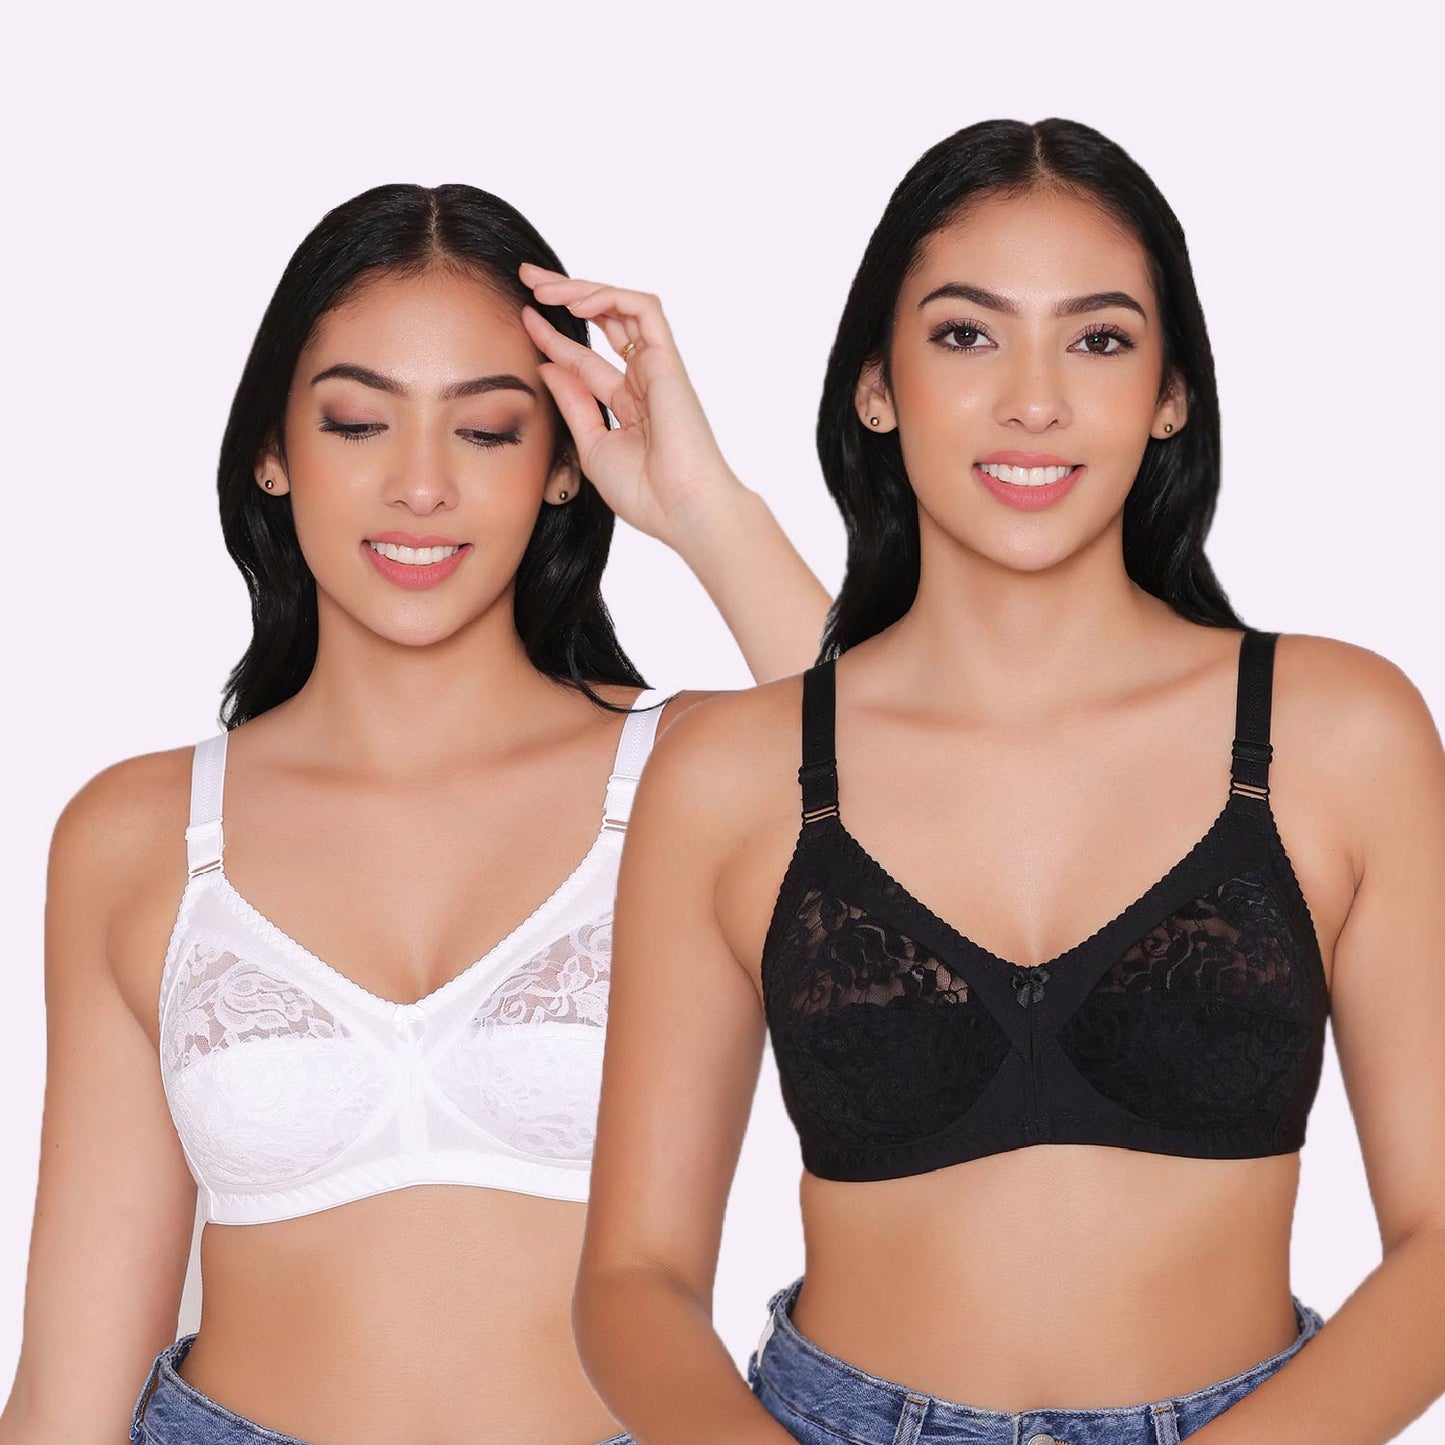 Benefits of Wearing a Full Coverage Bra in your daily life. – INKURV